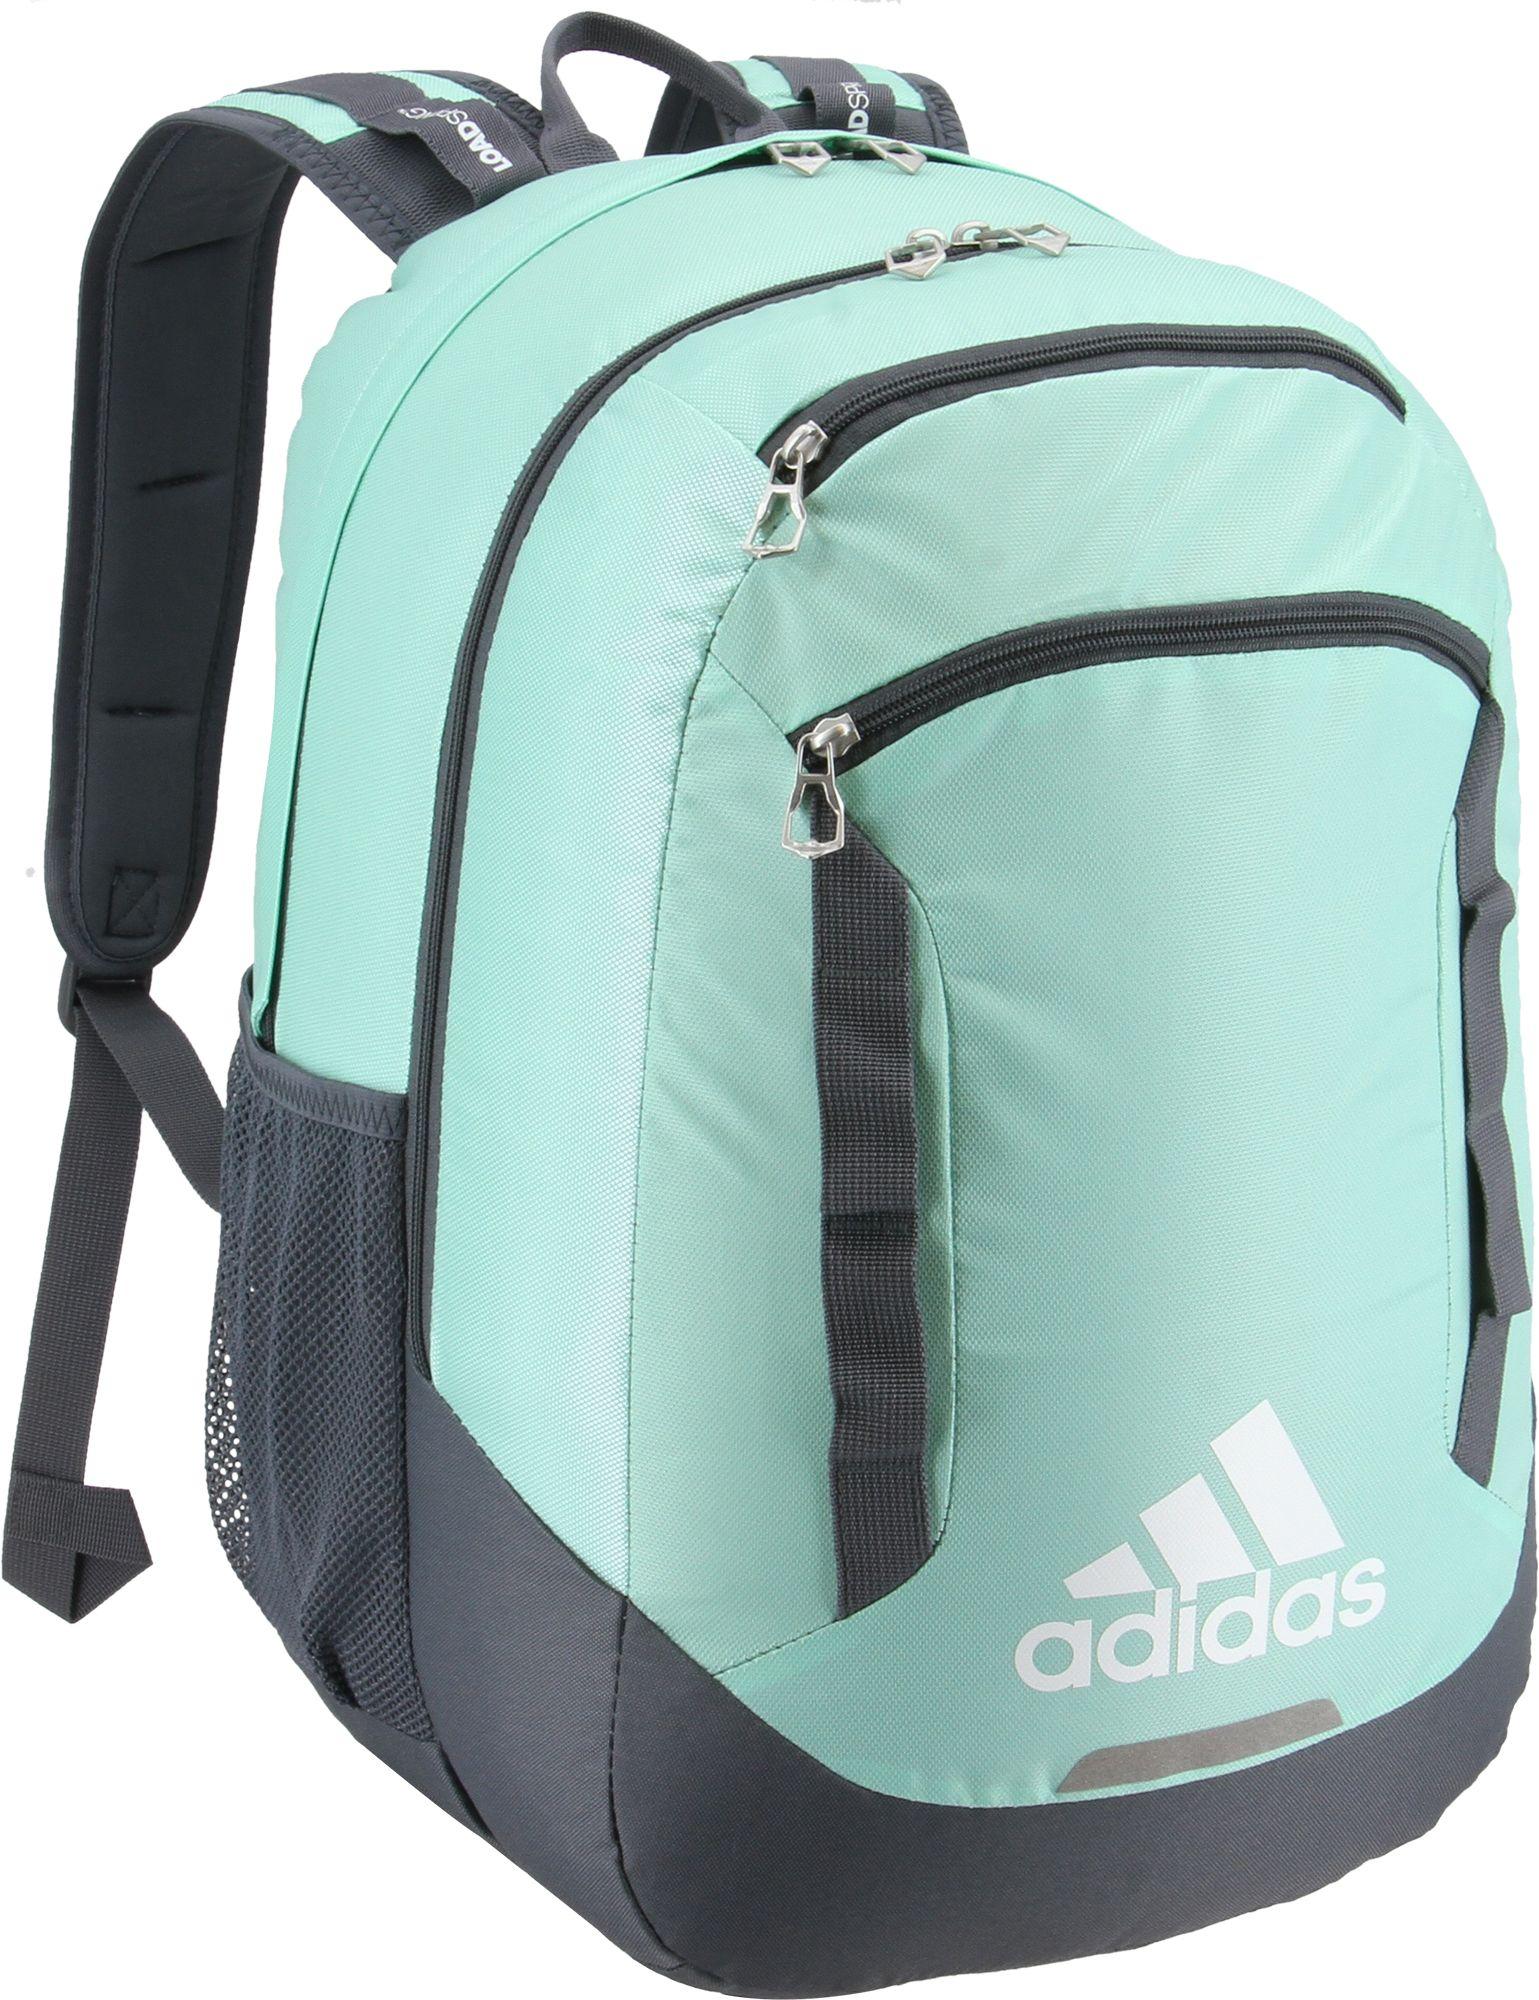 adidas Synthetic Rival Backpack in Green - Lyst